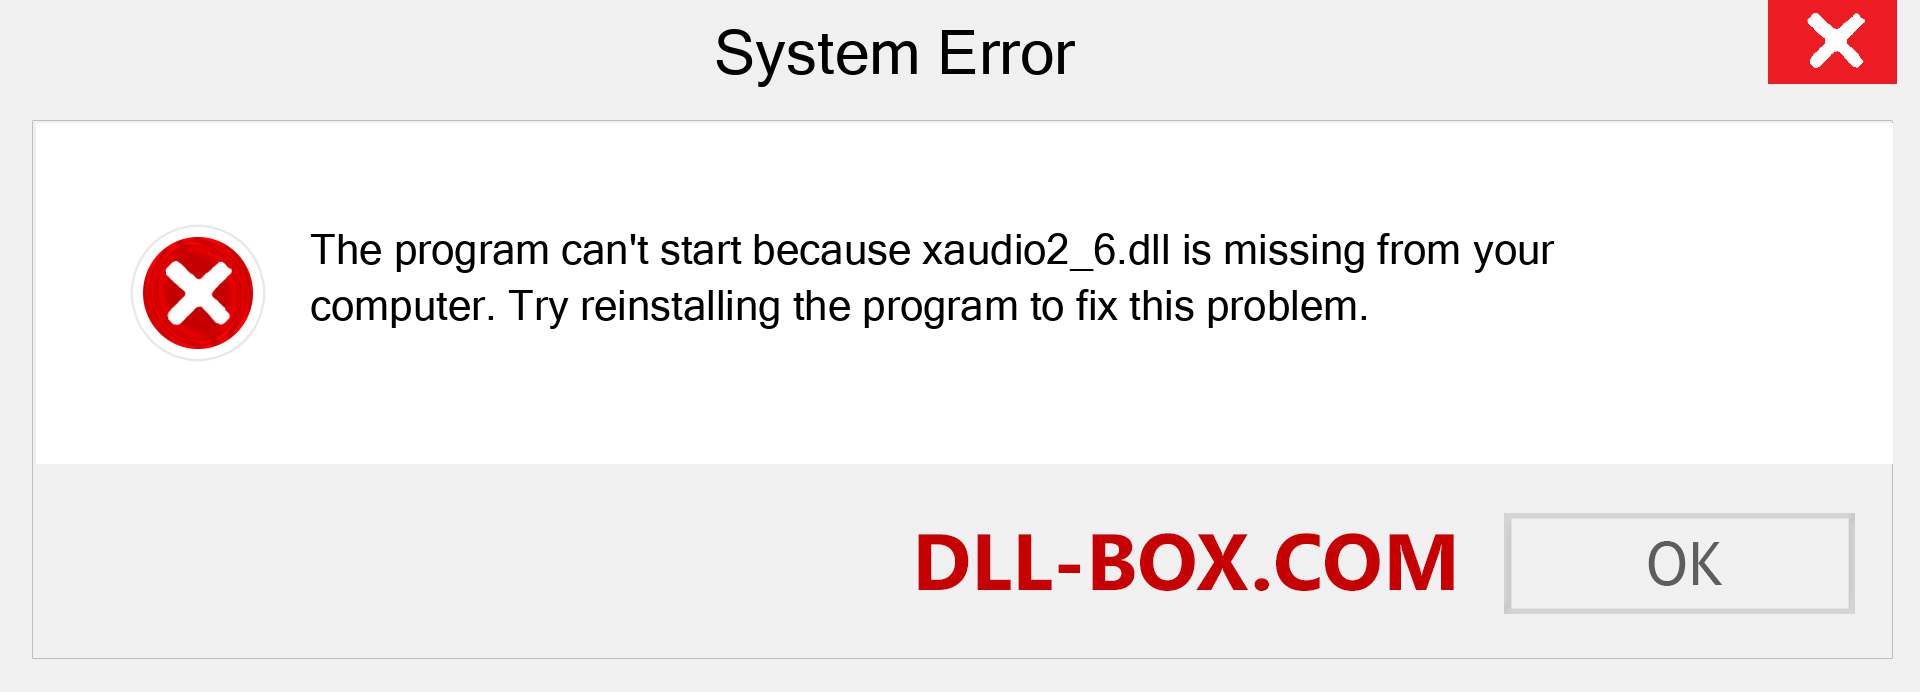  xaudio2_6.dll file is missing?. Download for Windows 7, 8, 10 - Fix  xaudio2_6 dll Missing Error on Windows, photos, images